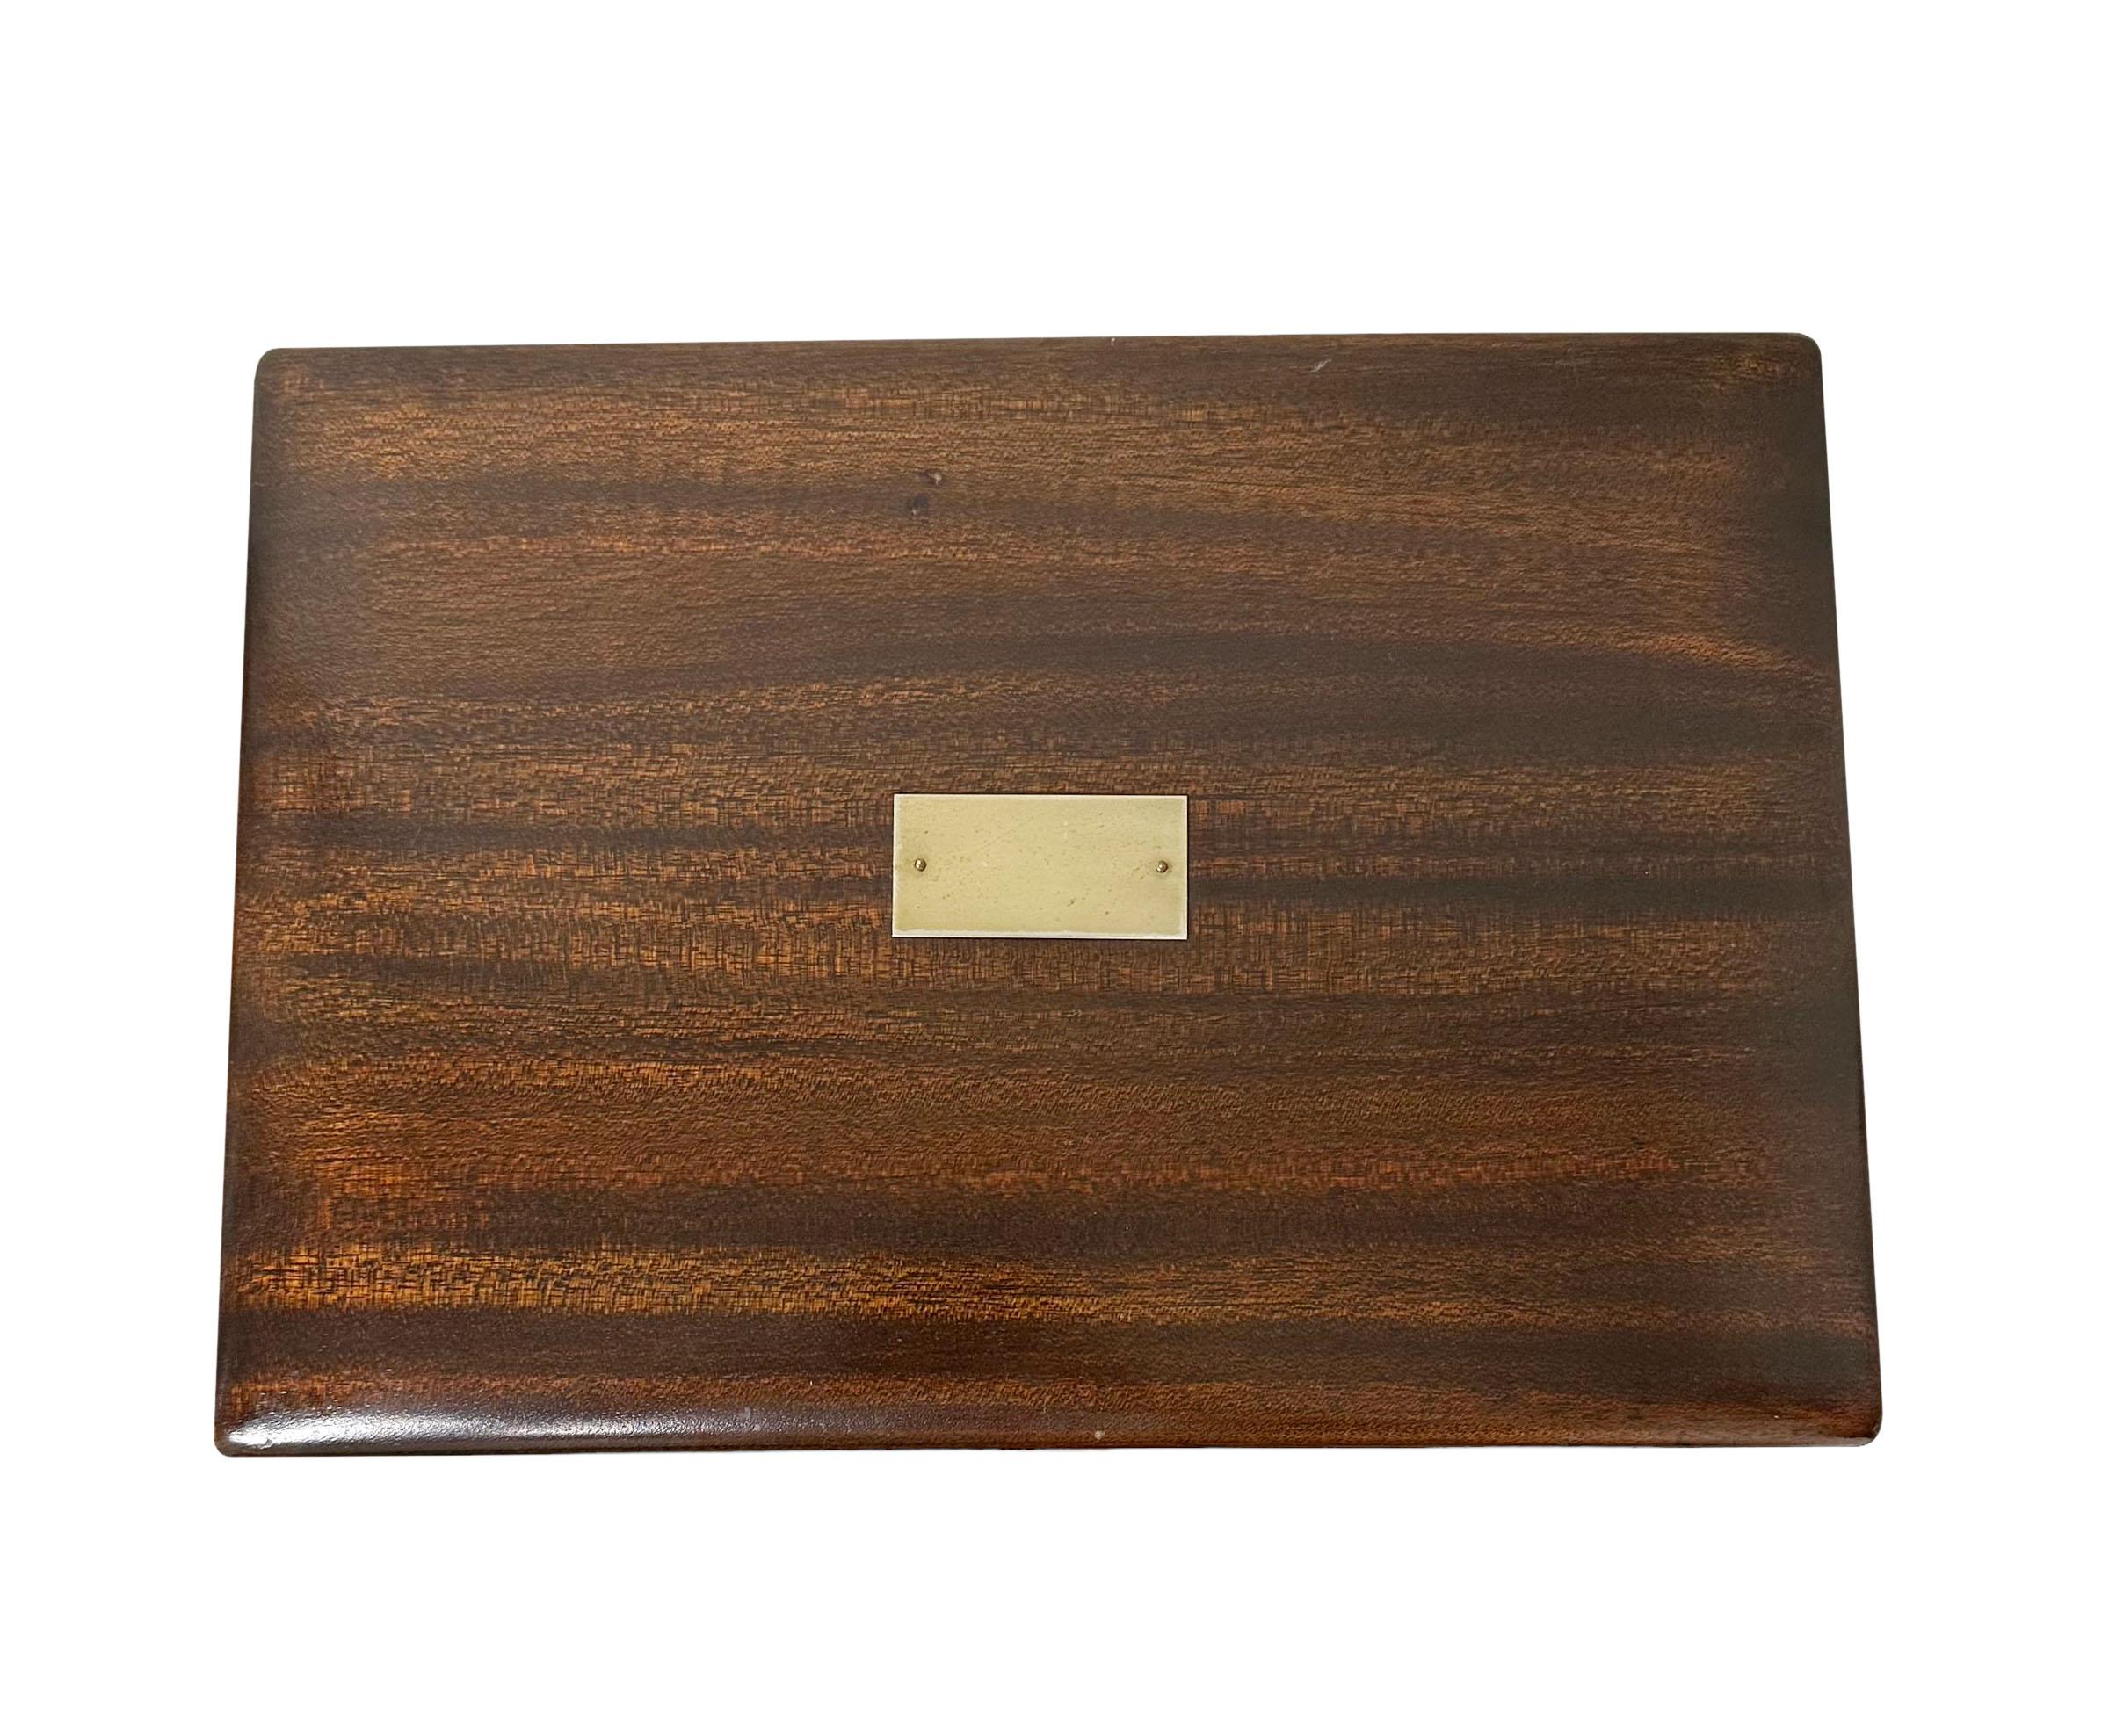 A 1920s English Rosewood humidor. The interior is white and the plaque does not have a monogram.